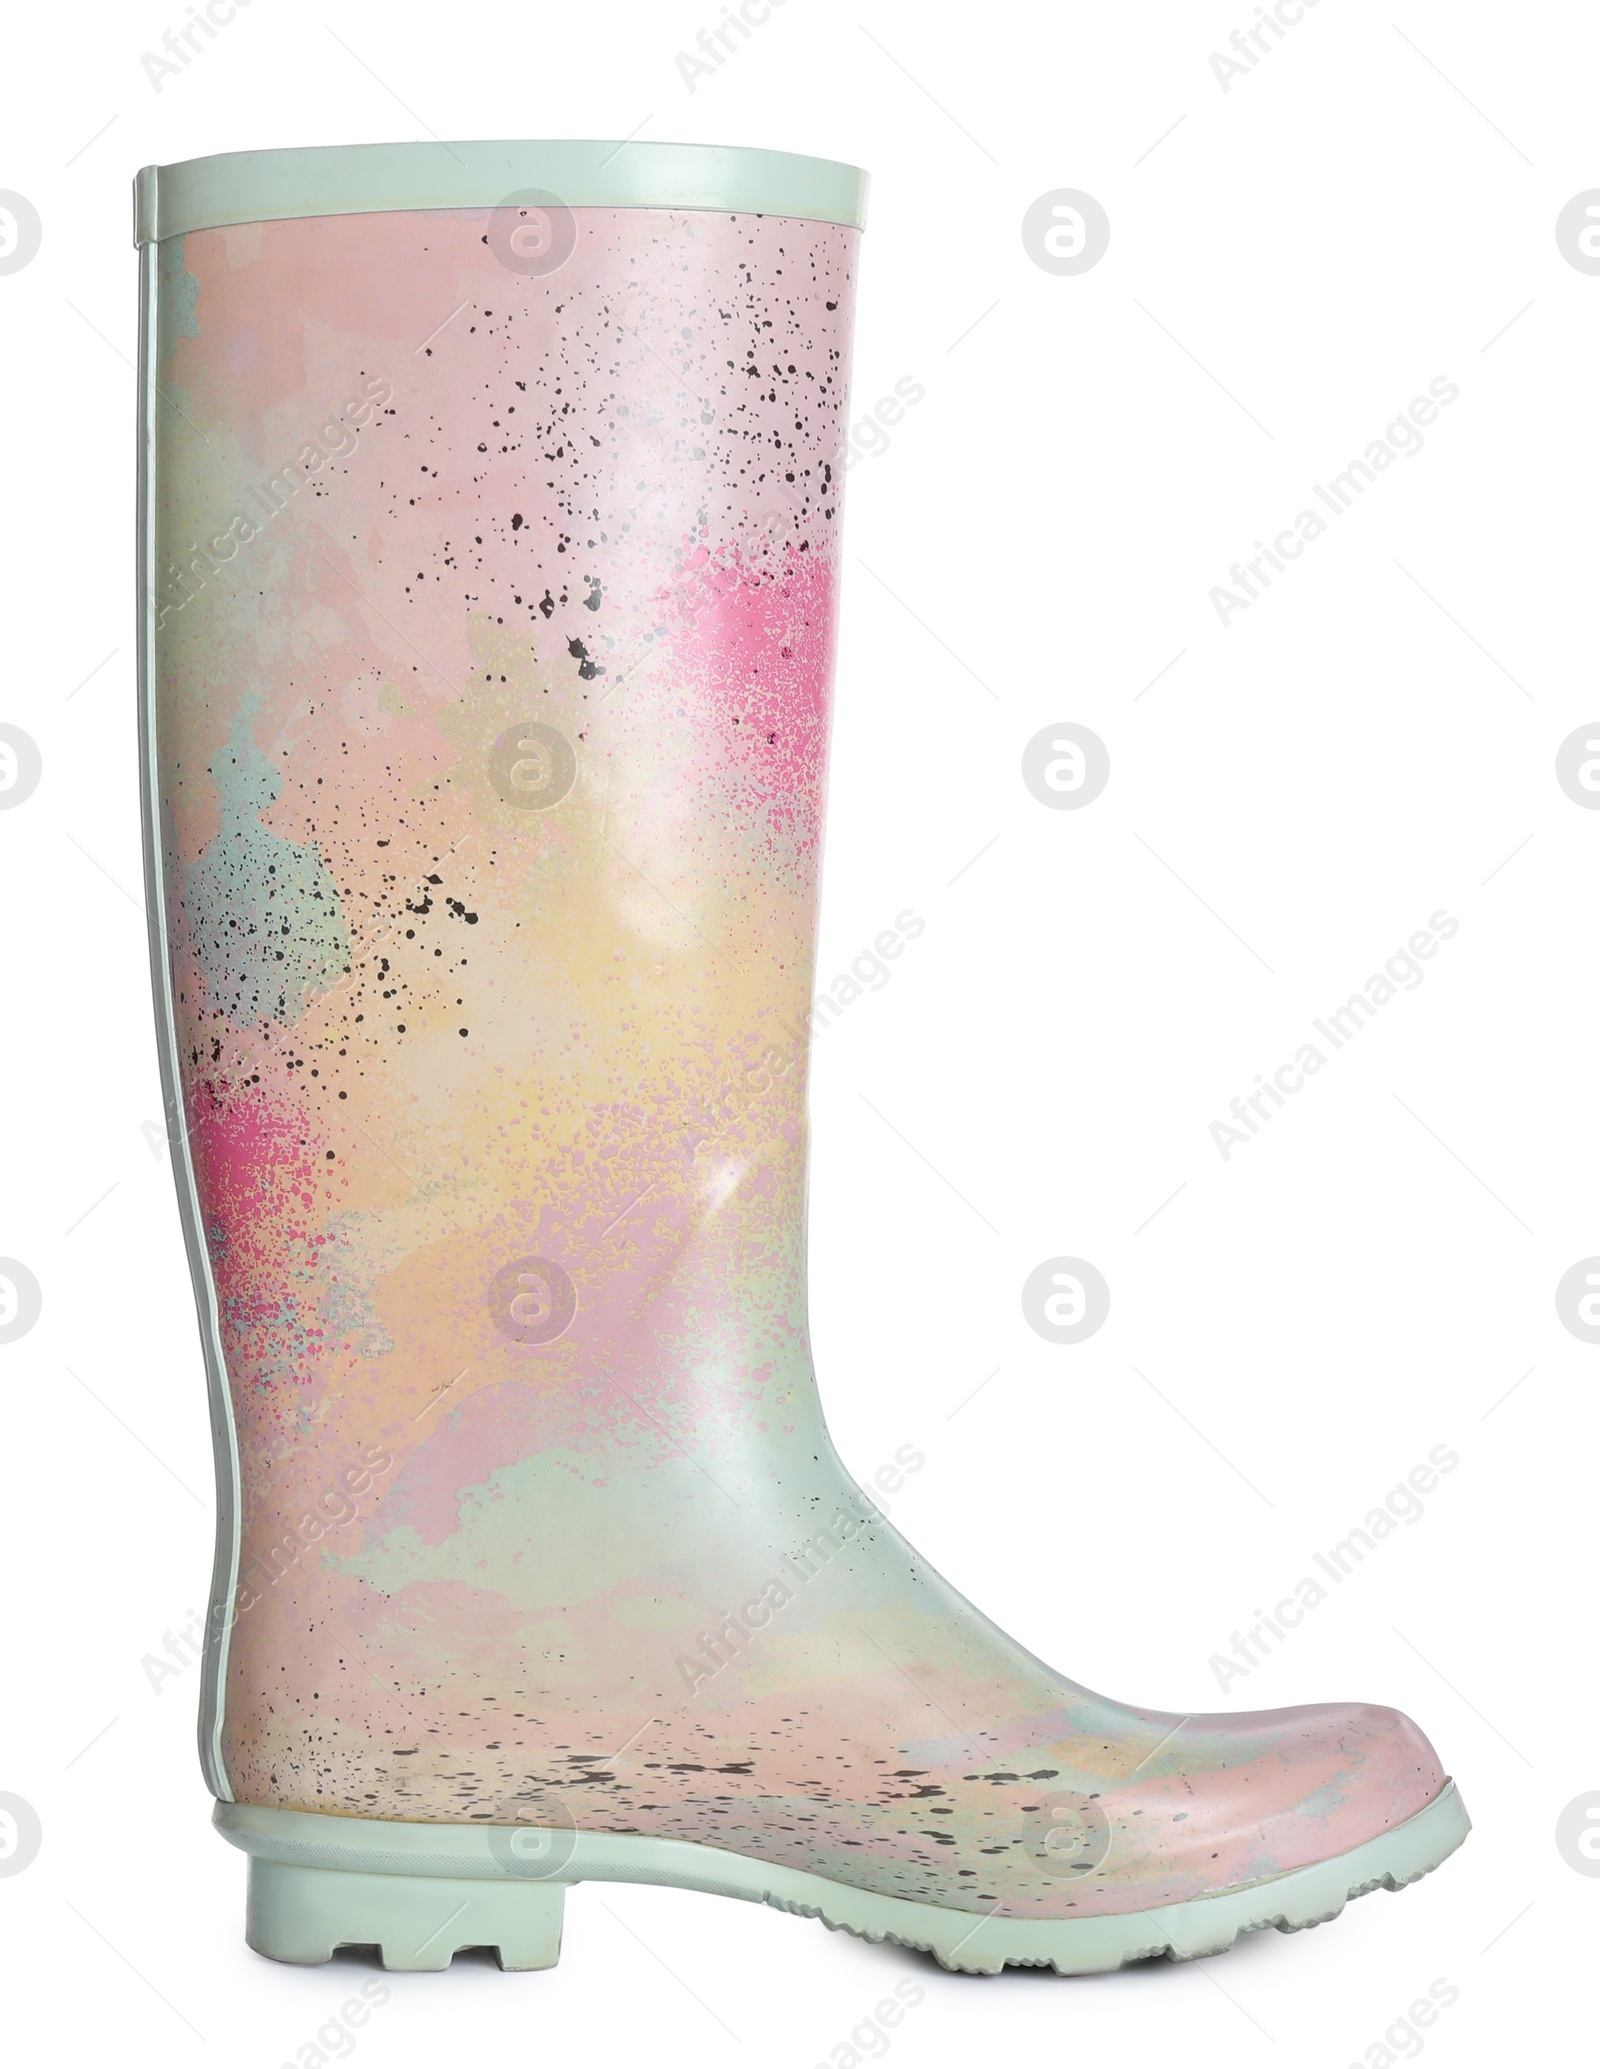 Photo of Modern colorful rubber boot isolated on white